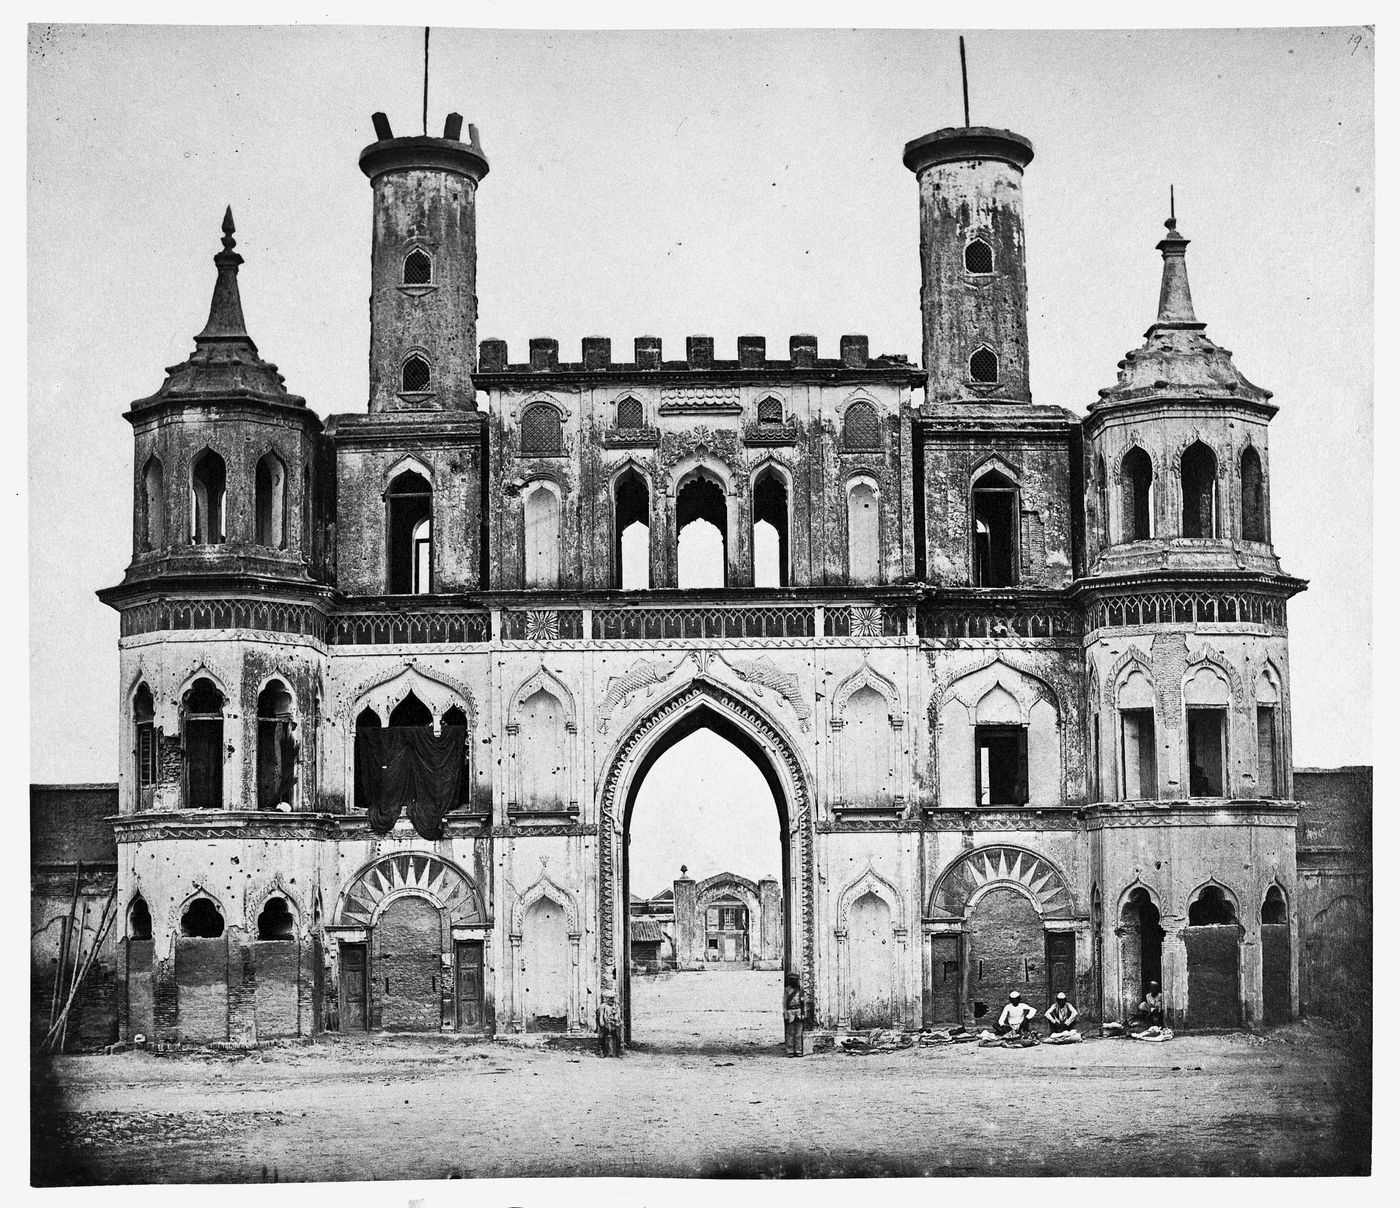 View of the Moti Mahal [Pearl Palace], Lucknow, India